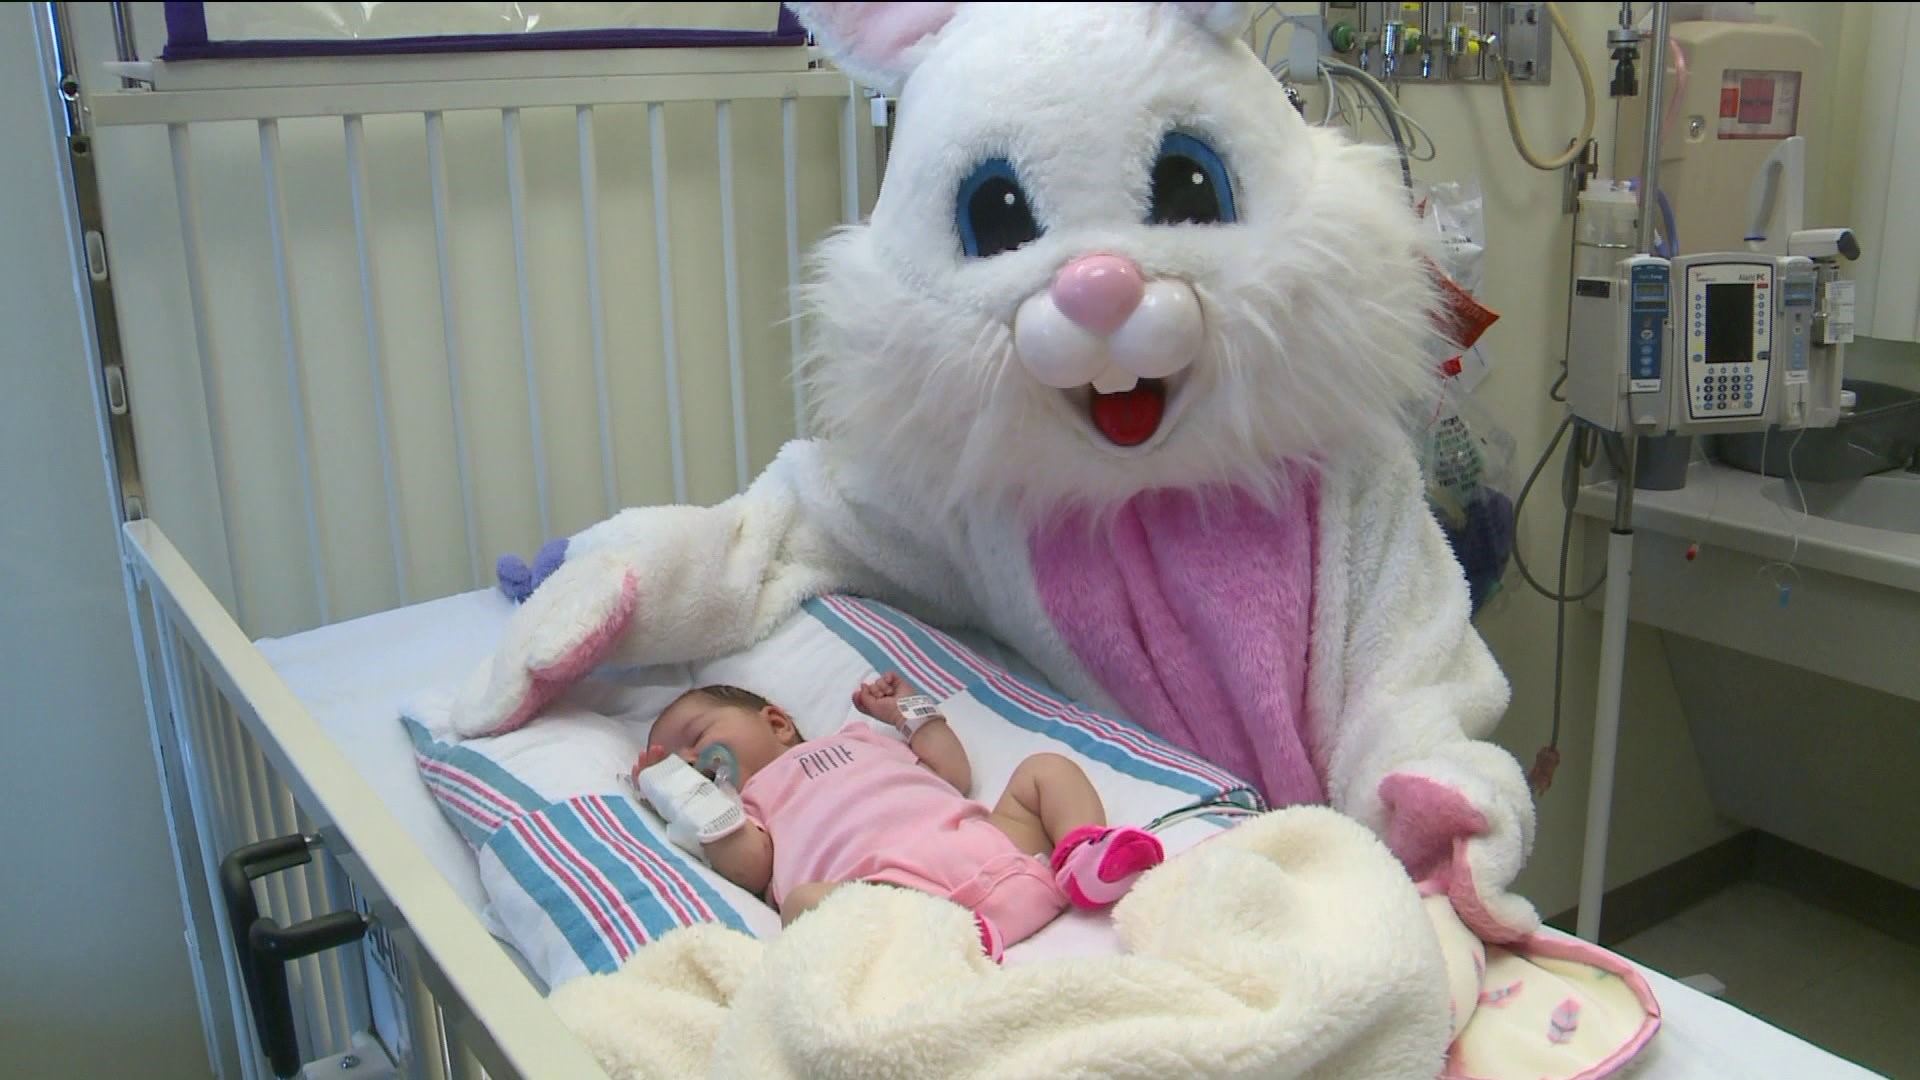 Patients at CCMC get a special Easter visitor